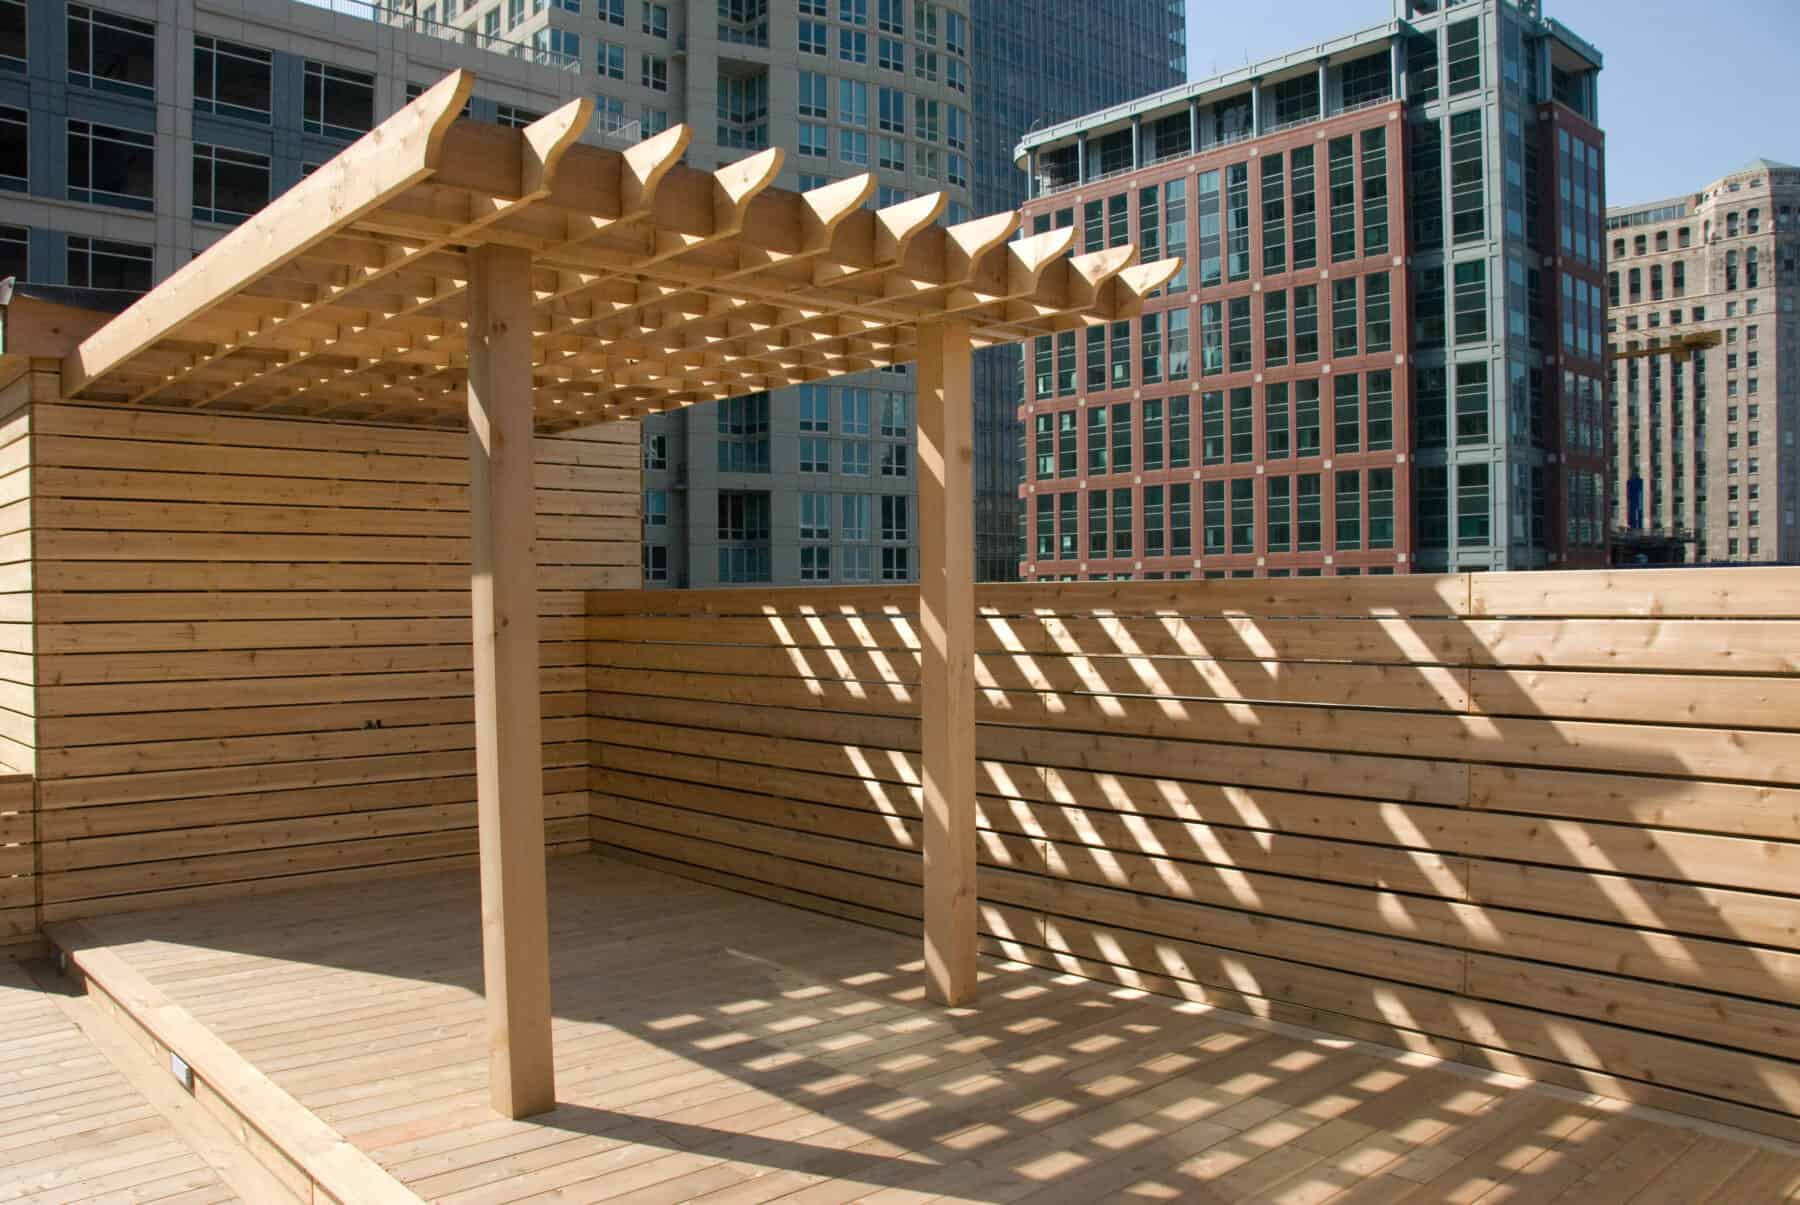 Custom Rooftop Deck with Wood Pergola, Plant boxes, Fence and Walkways from Construction Specialty Projects by Commercial Builder & General Contractor Structural Enterprises